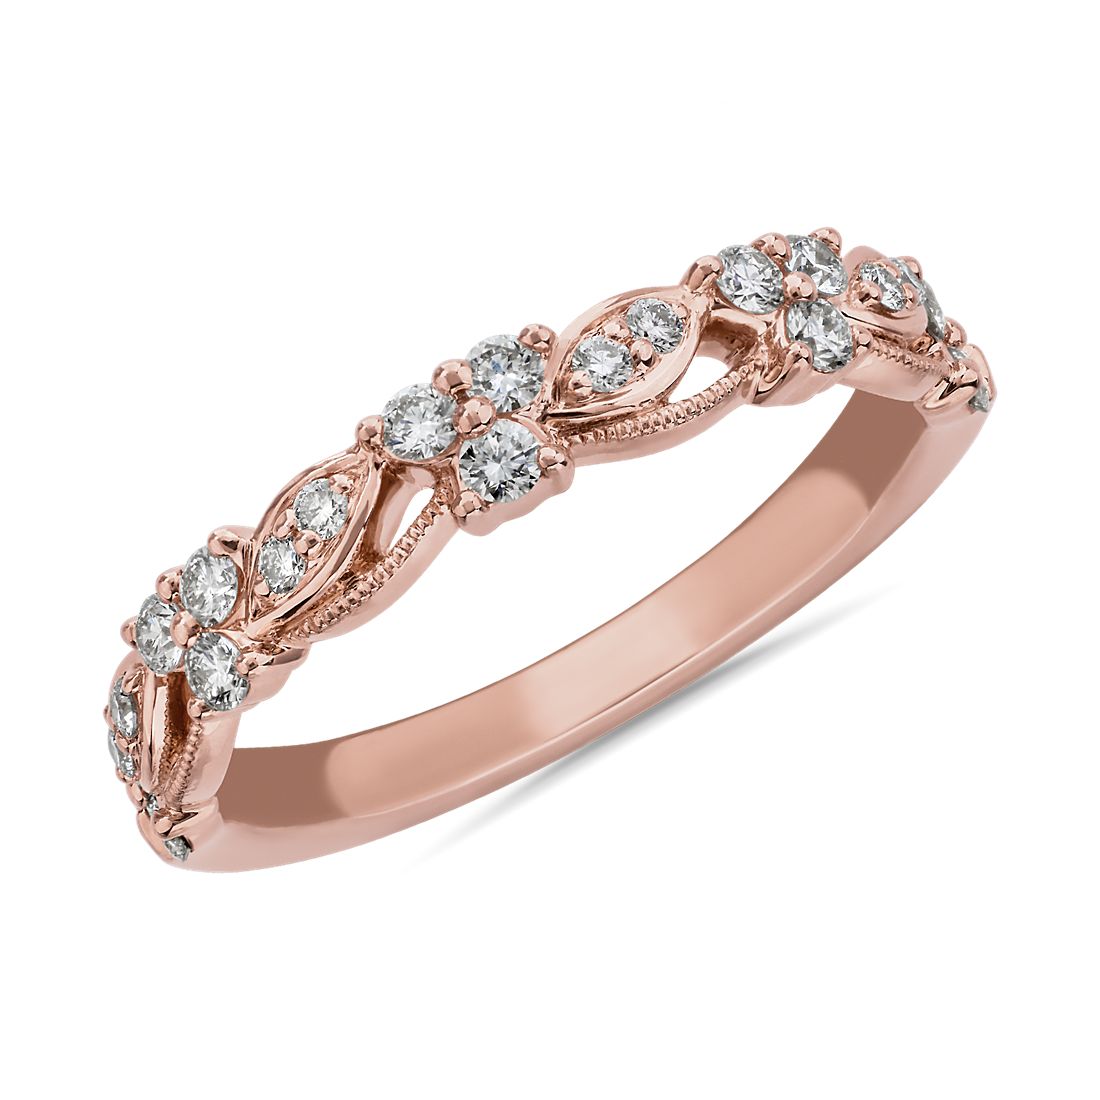 Romantic Vintage Lace Diamond Ring in 14k Rose Gold (1/3 ct. tw.)